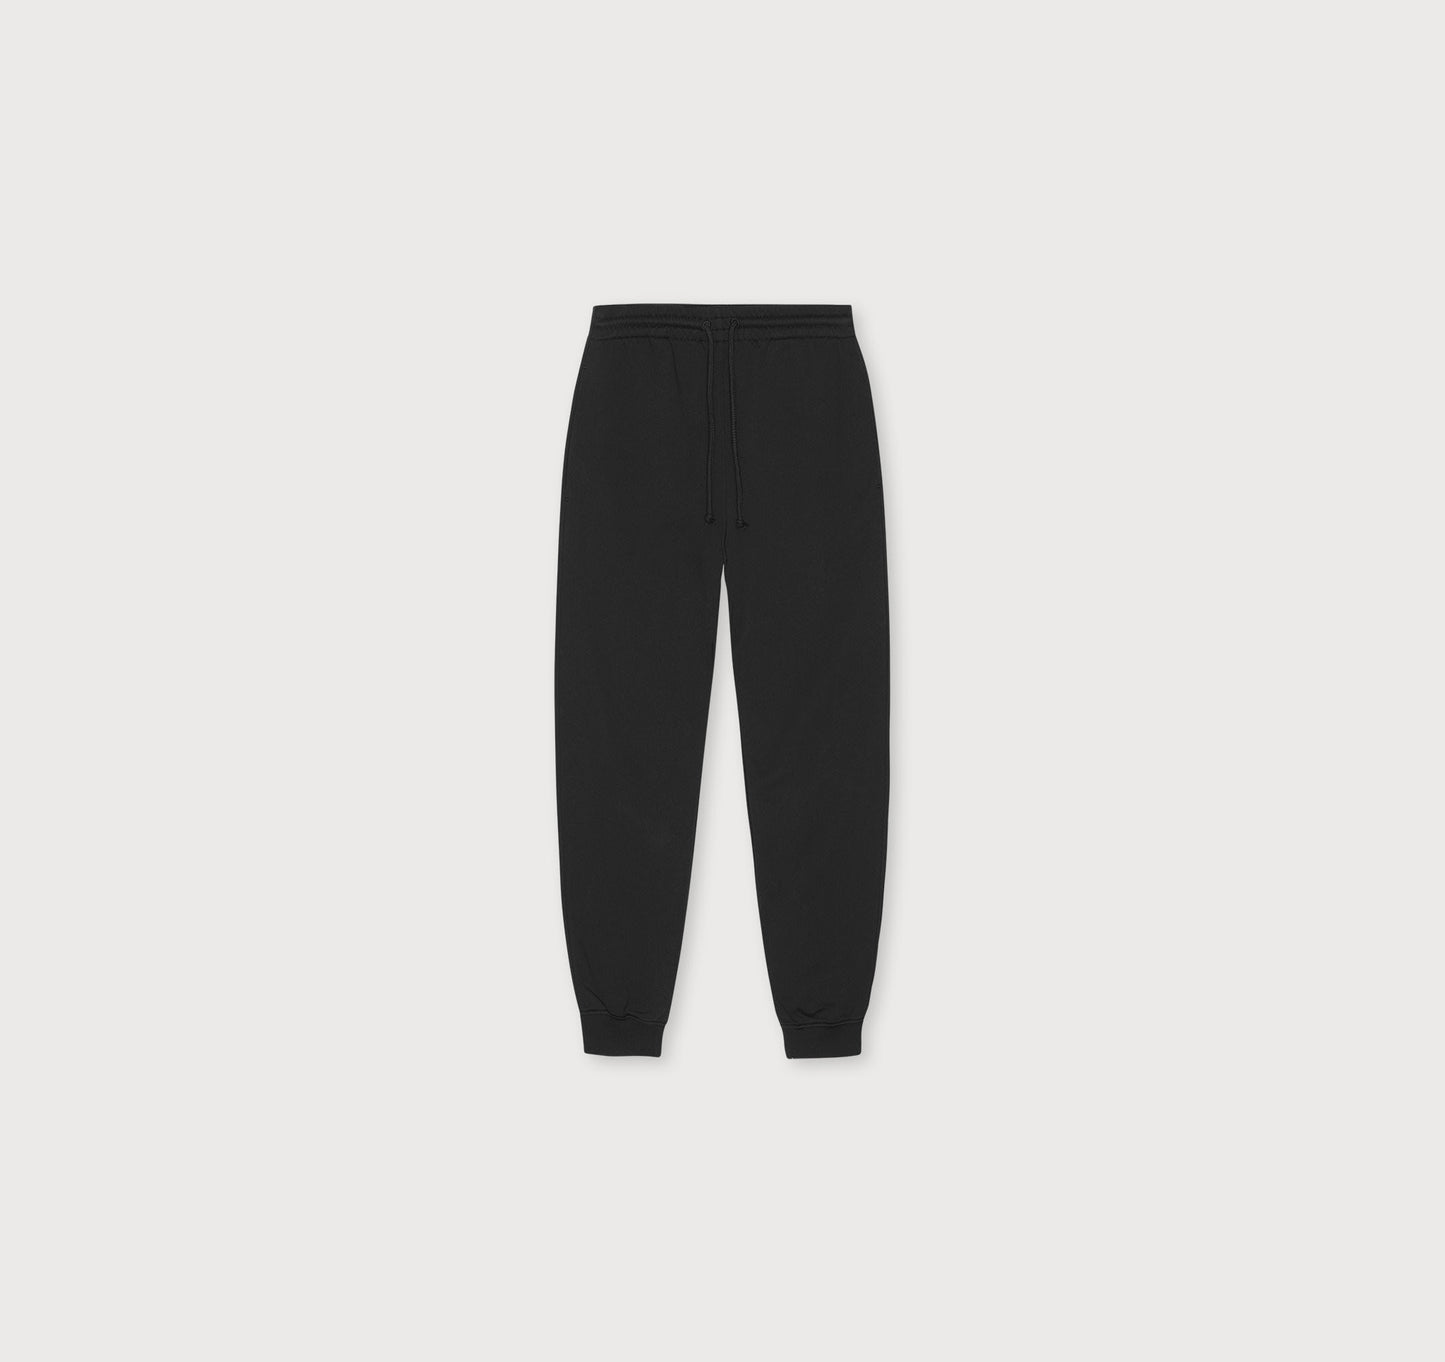 True French-Terry Sweatpants